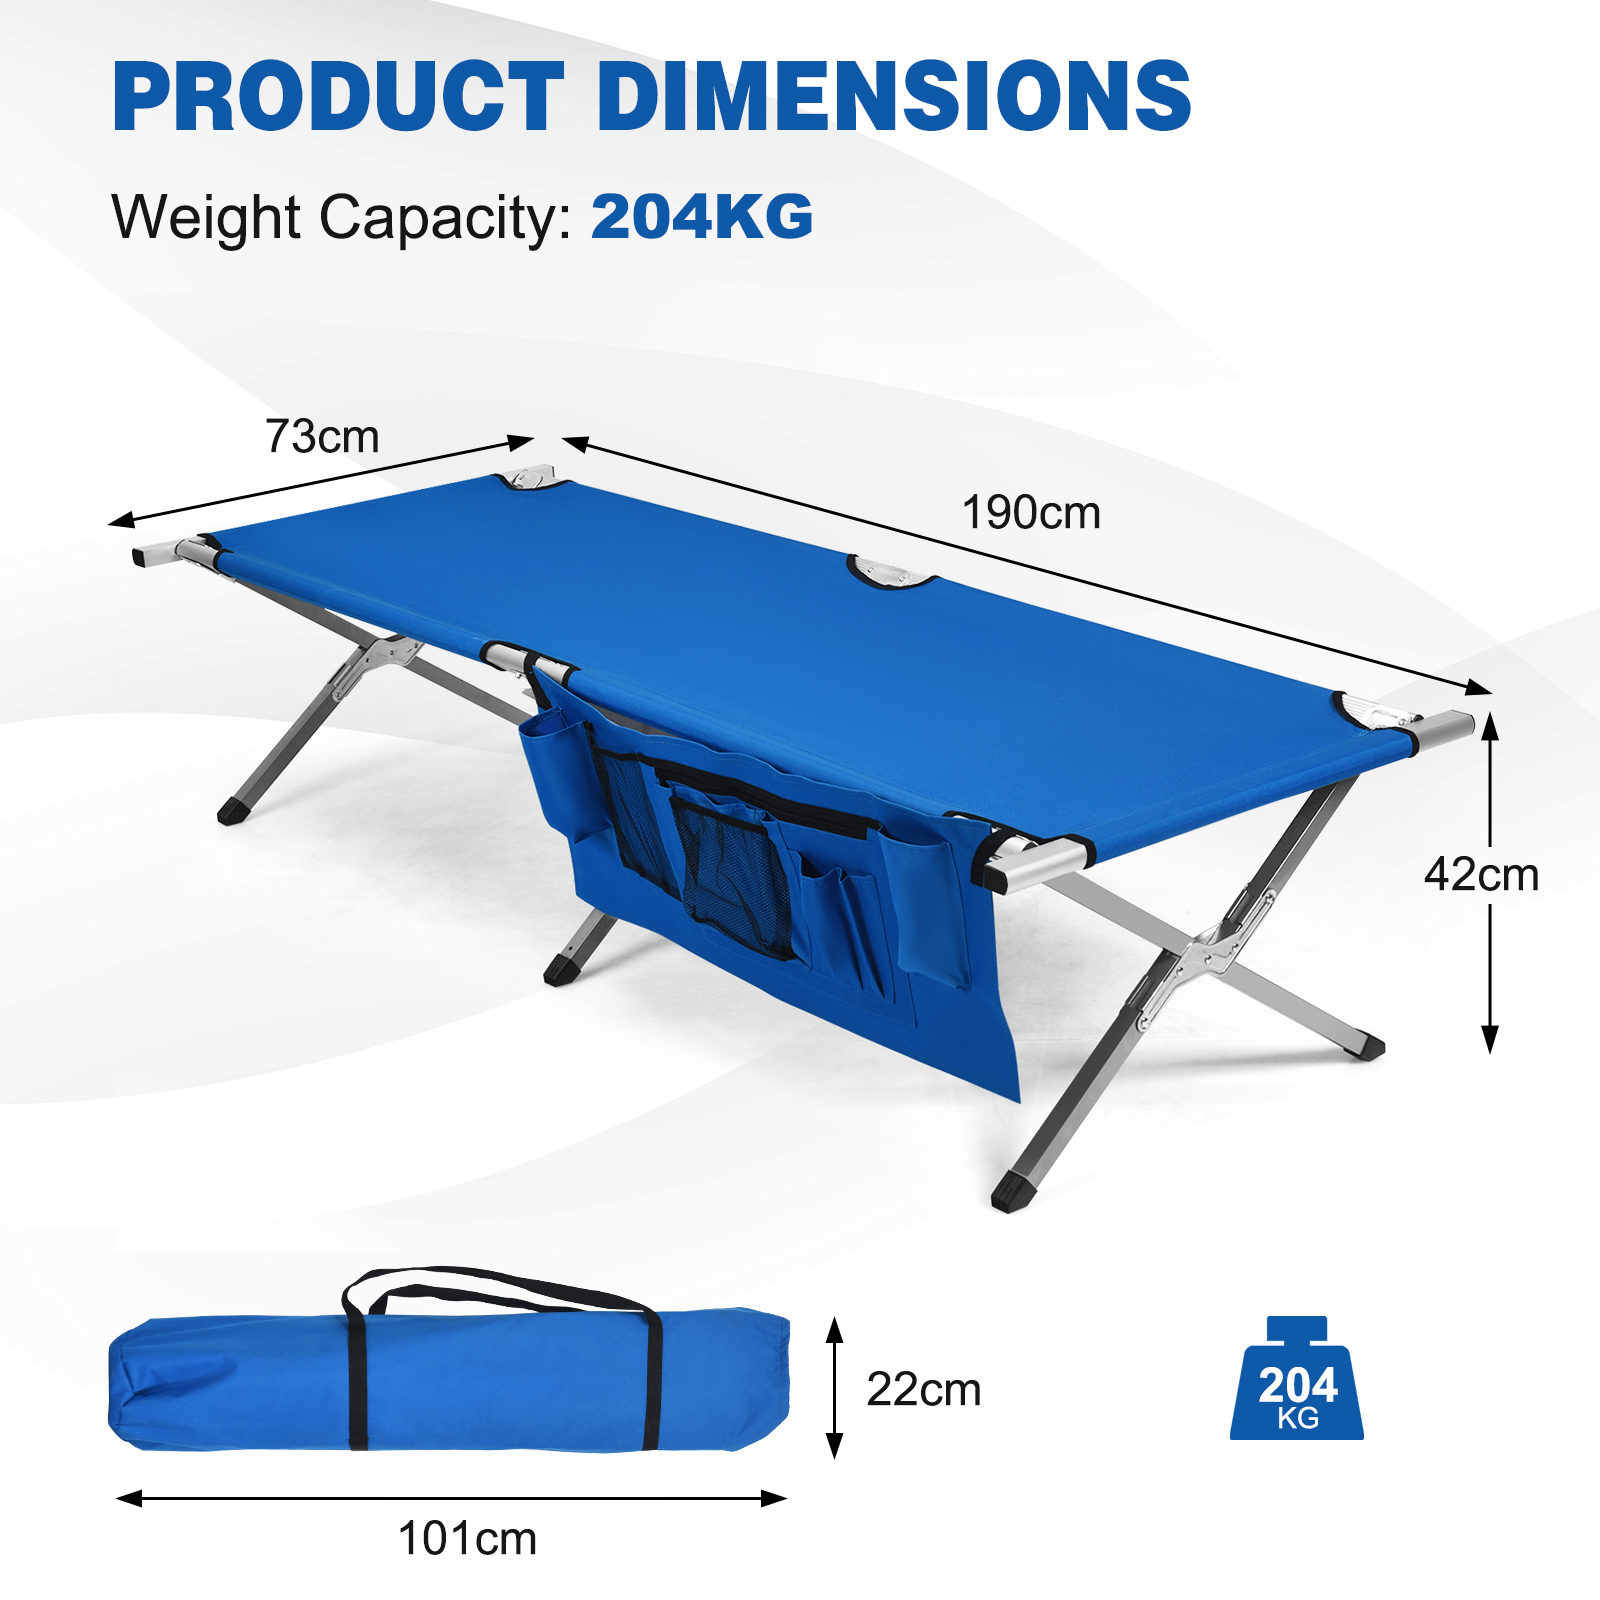 Folding_Camping_Bed_Outdoor_Sleeping_Cot_with_Carry_Bag_for_Beach_Blue_size-4.jpg